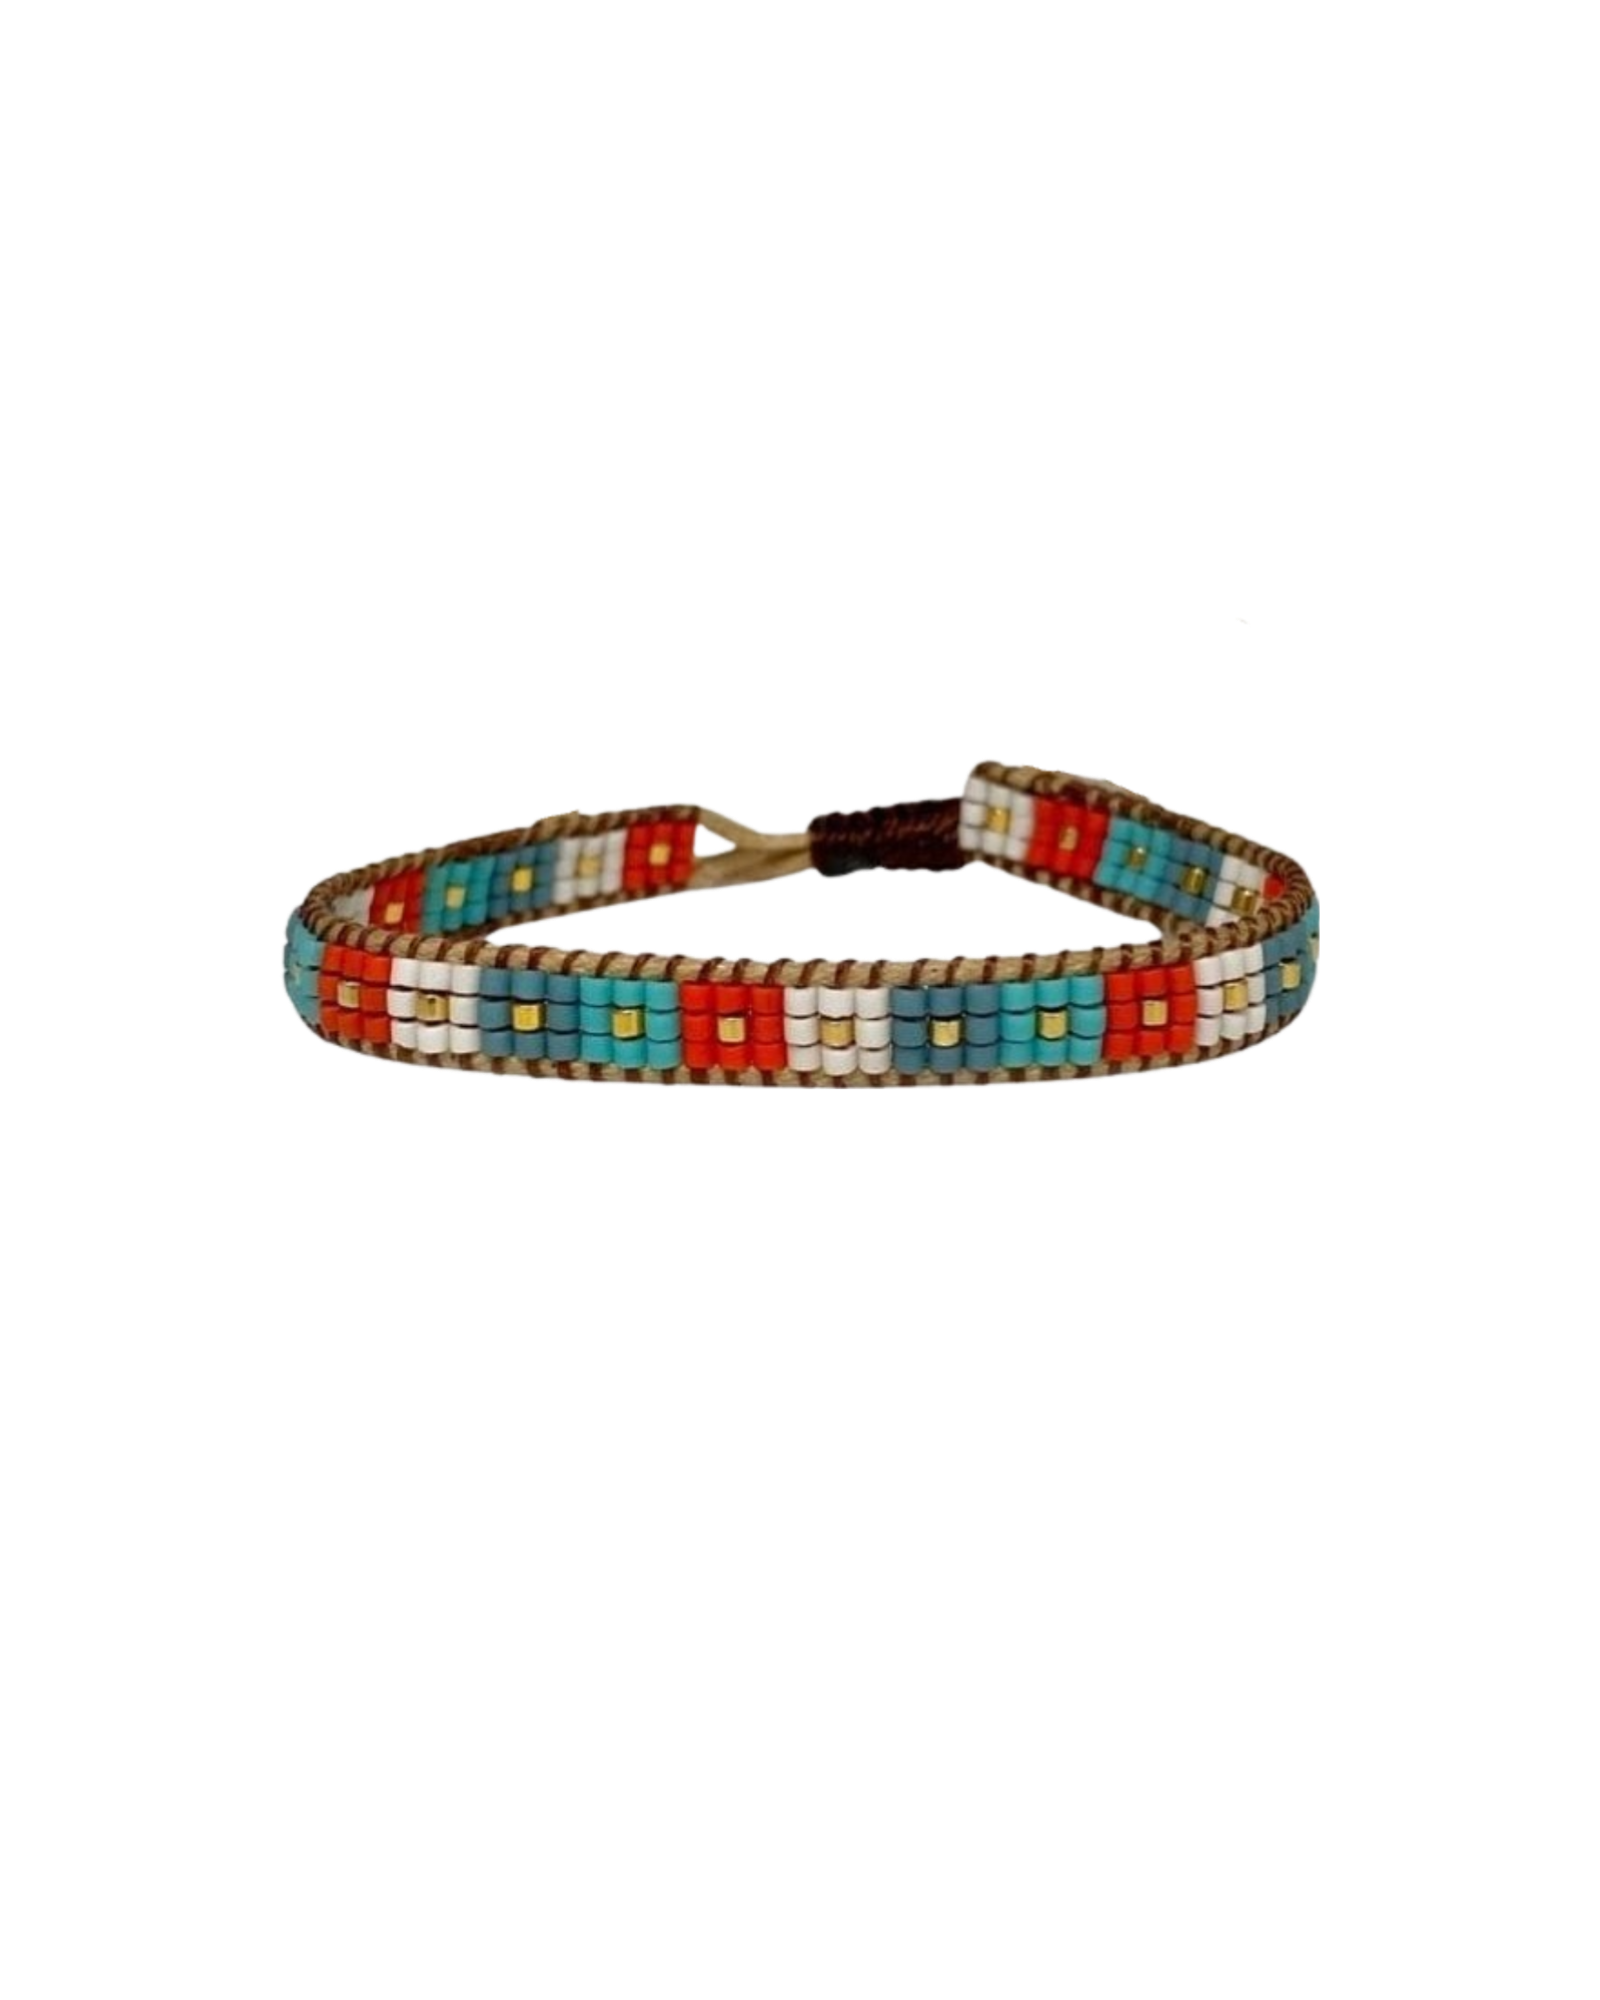 beaded-bracelet with checkered design in coral and turquoise colors